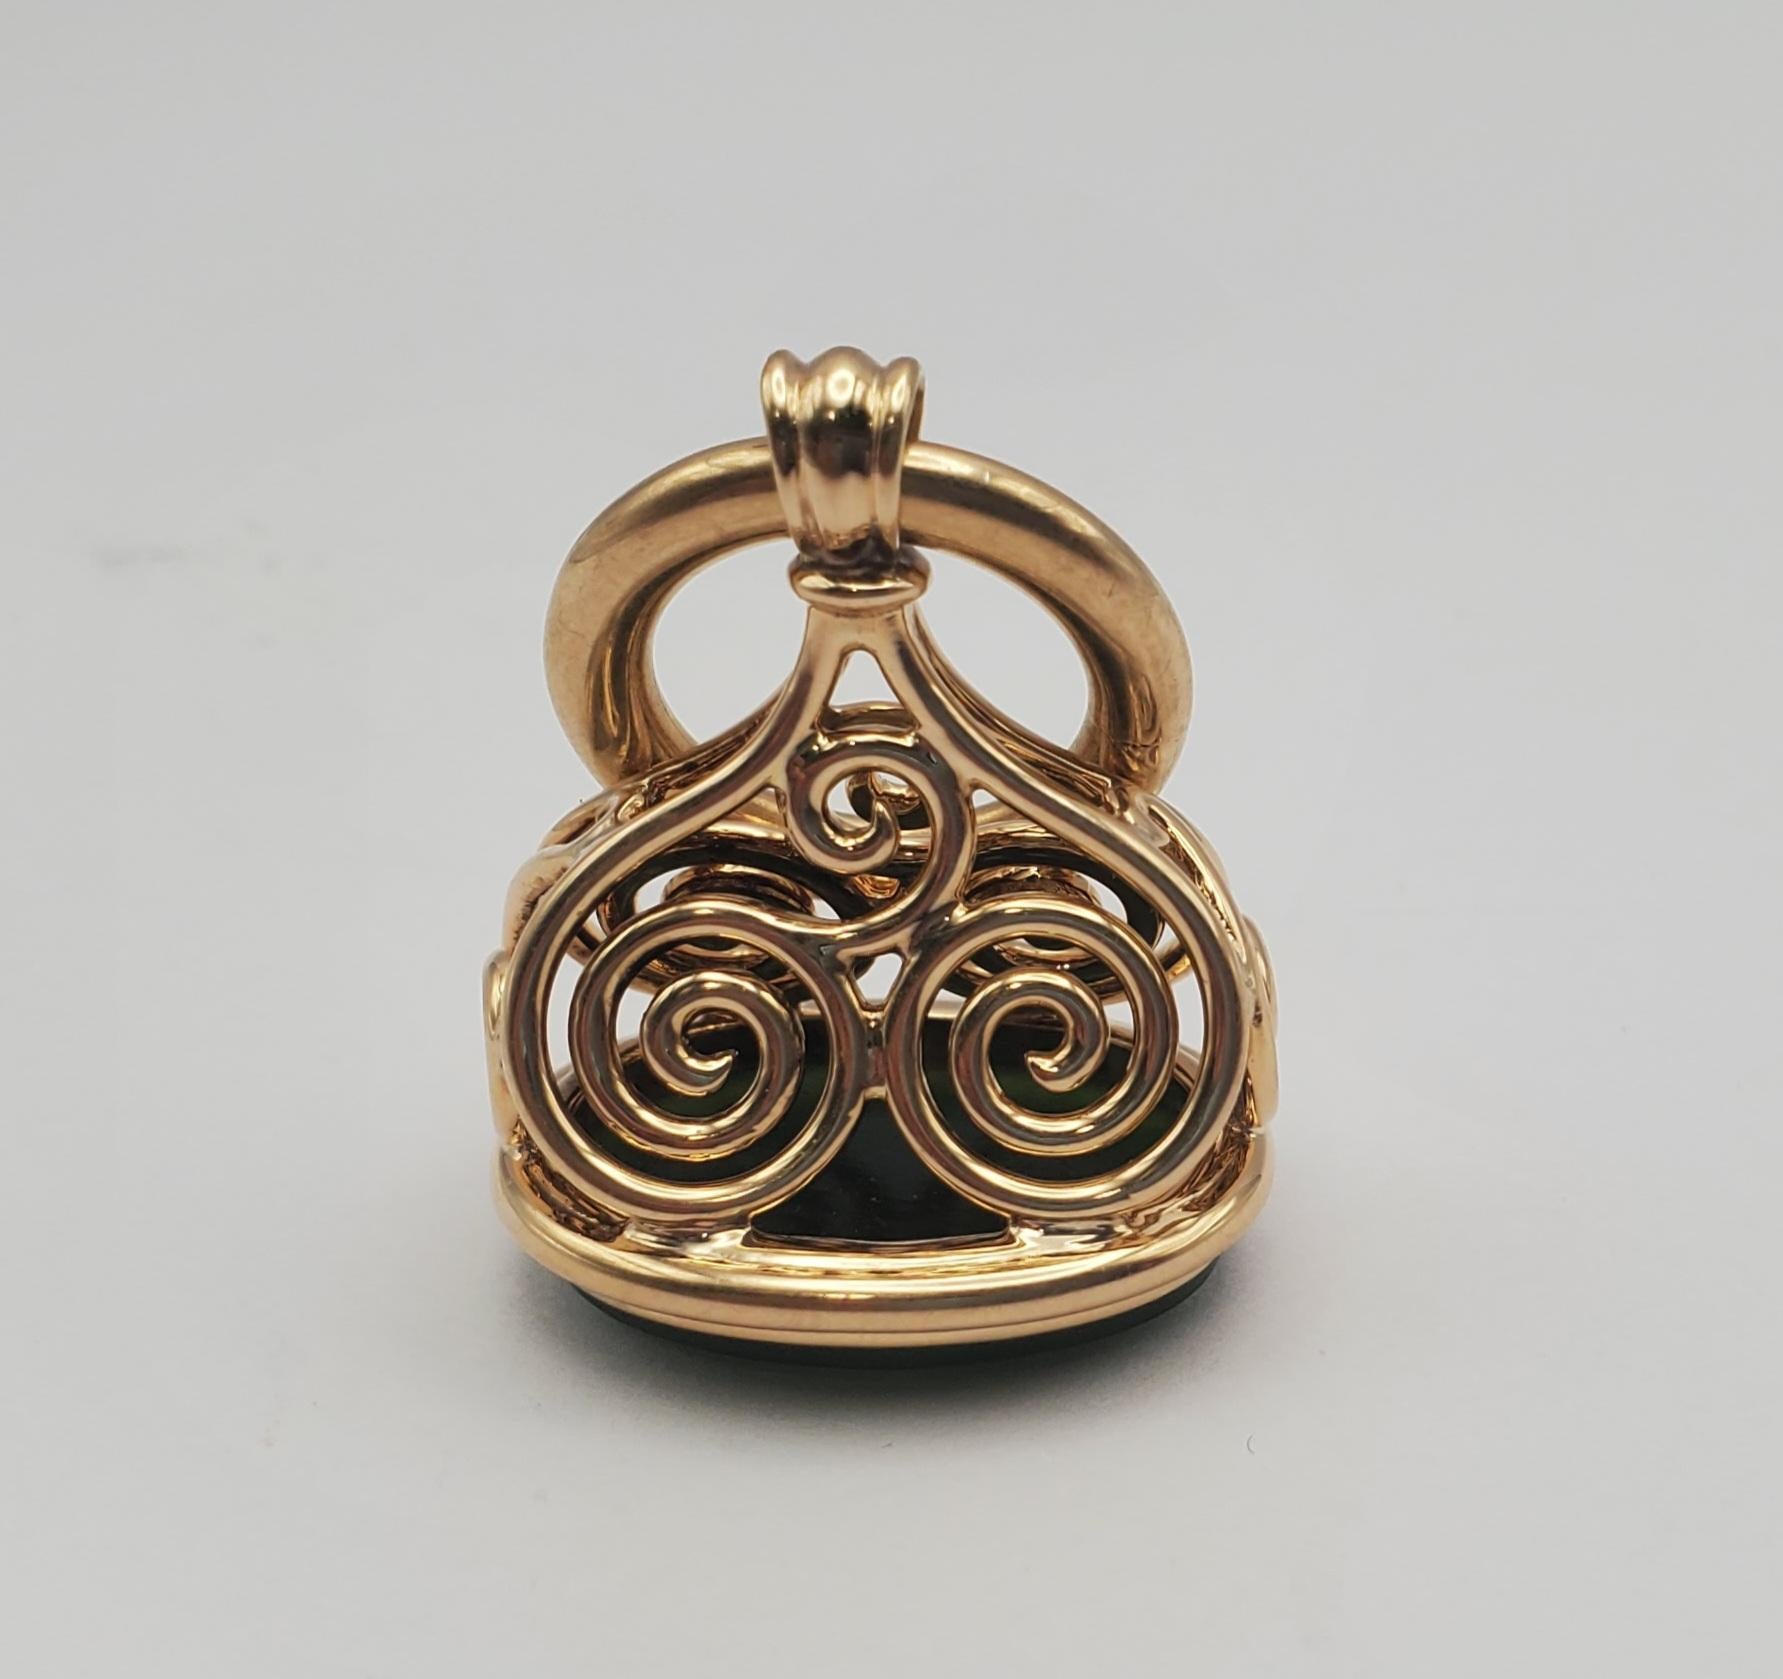 Unique Victorian fob pendant crafted in 14k yellow gold and bezel set with a nephrite jade cabochon. Fobs were often worn at the end of pocket watch chains or on lapel pins in Victorian times. Today they are primarily worn on chains as necklace